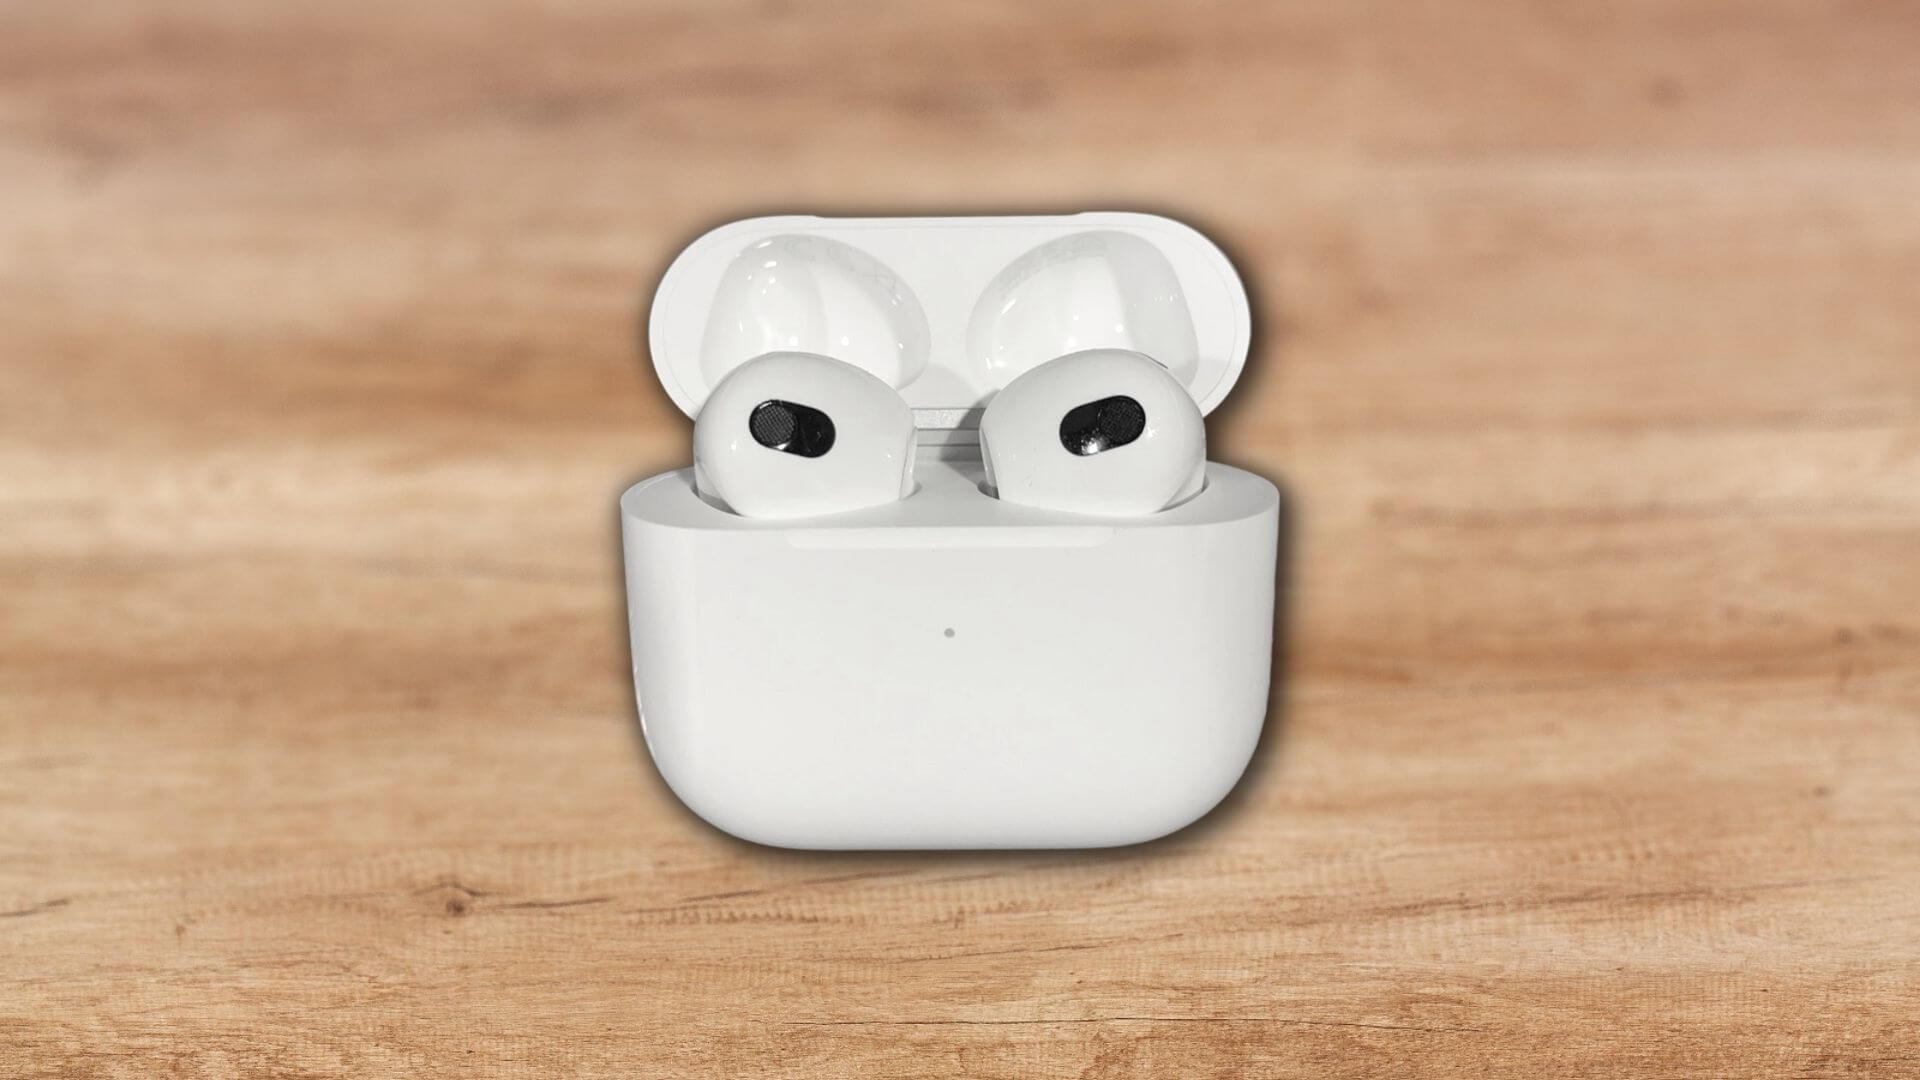 Airpods-3